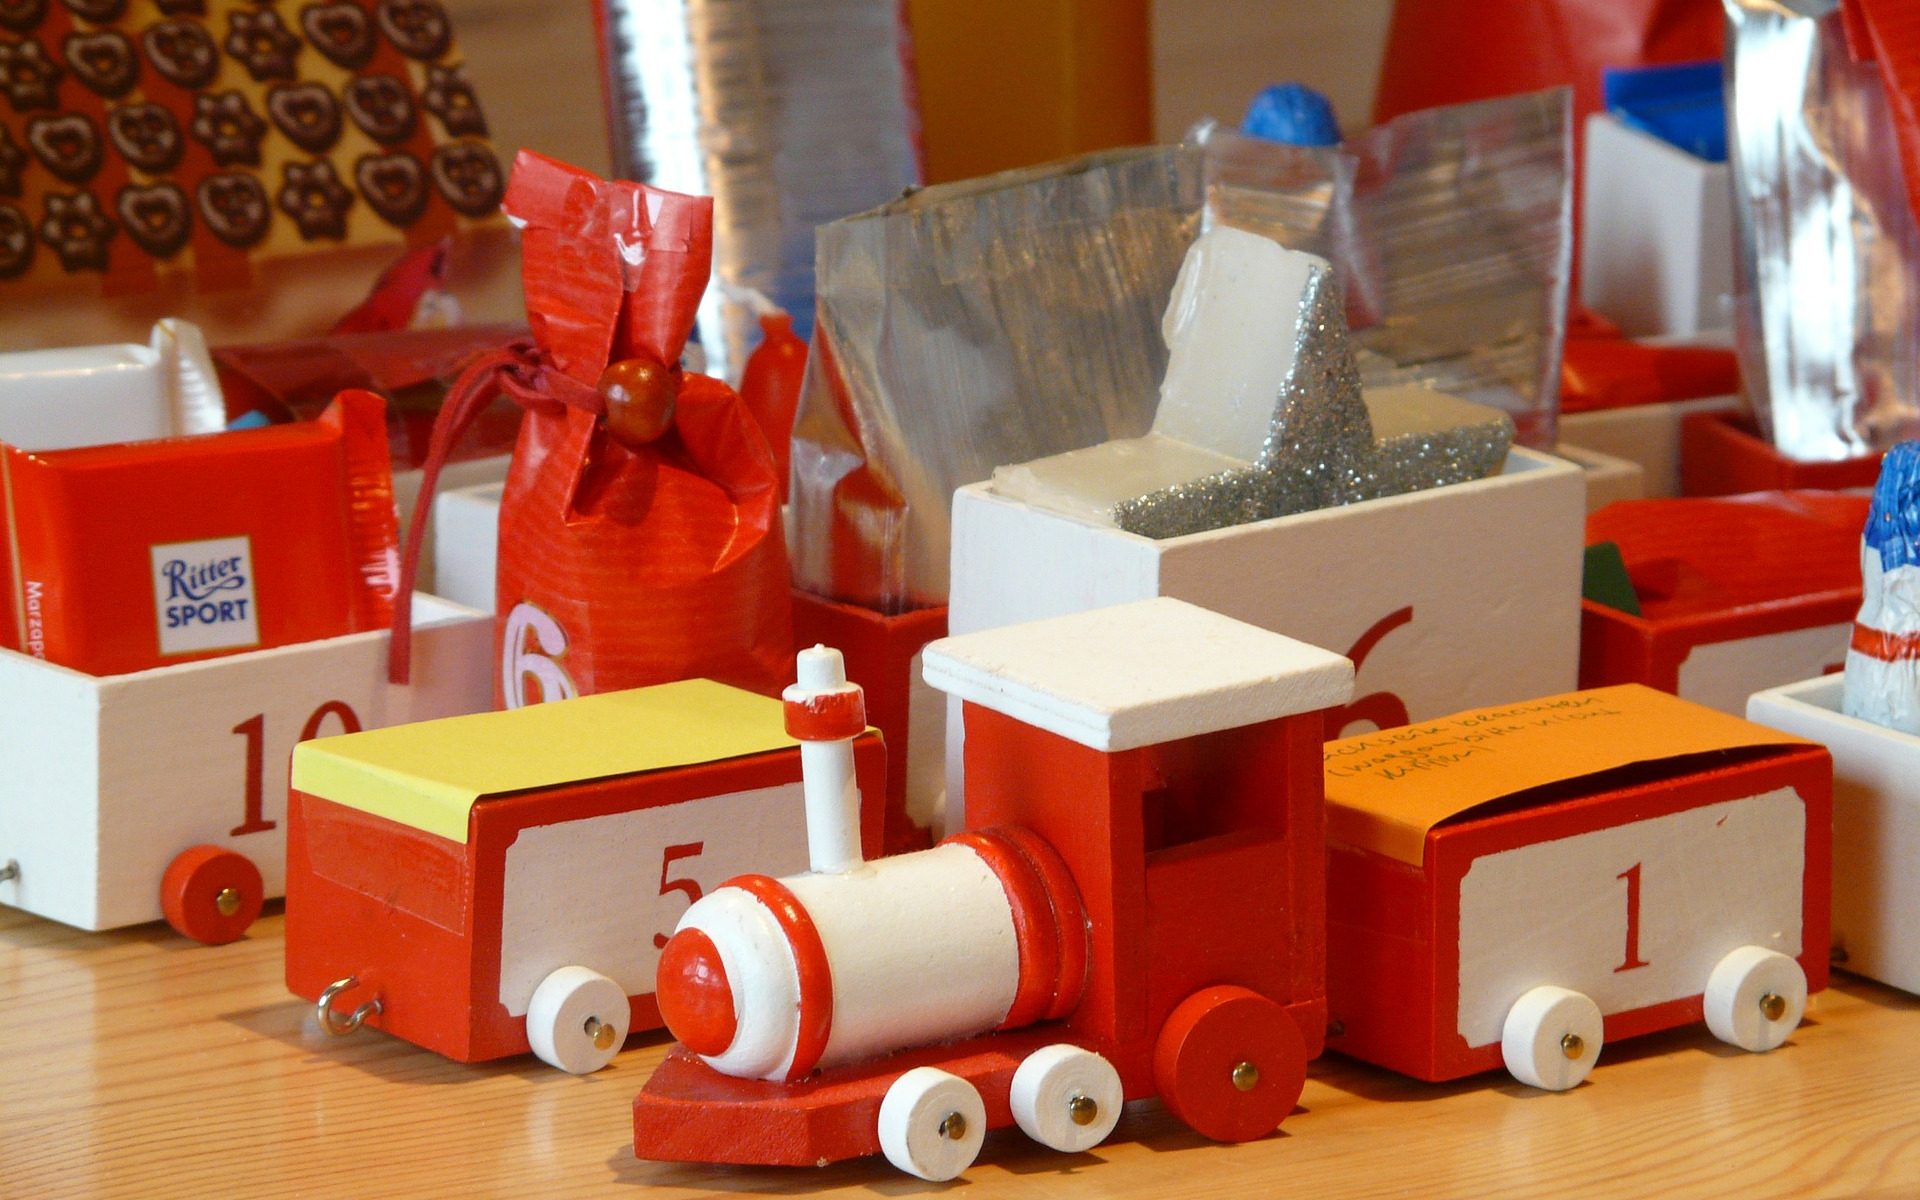 How to Make your Wooden Train Set: Choosing Options